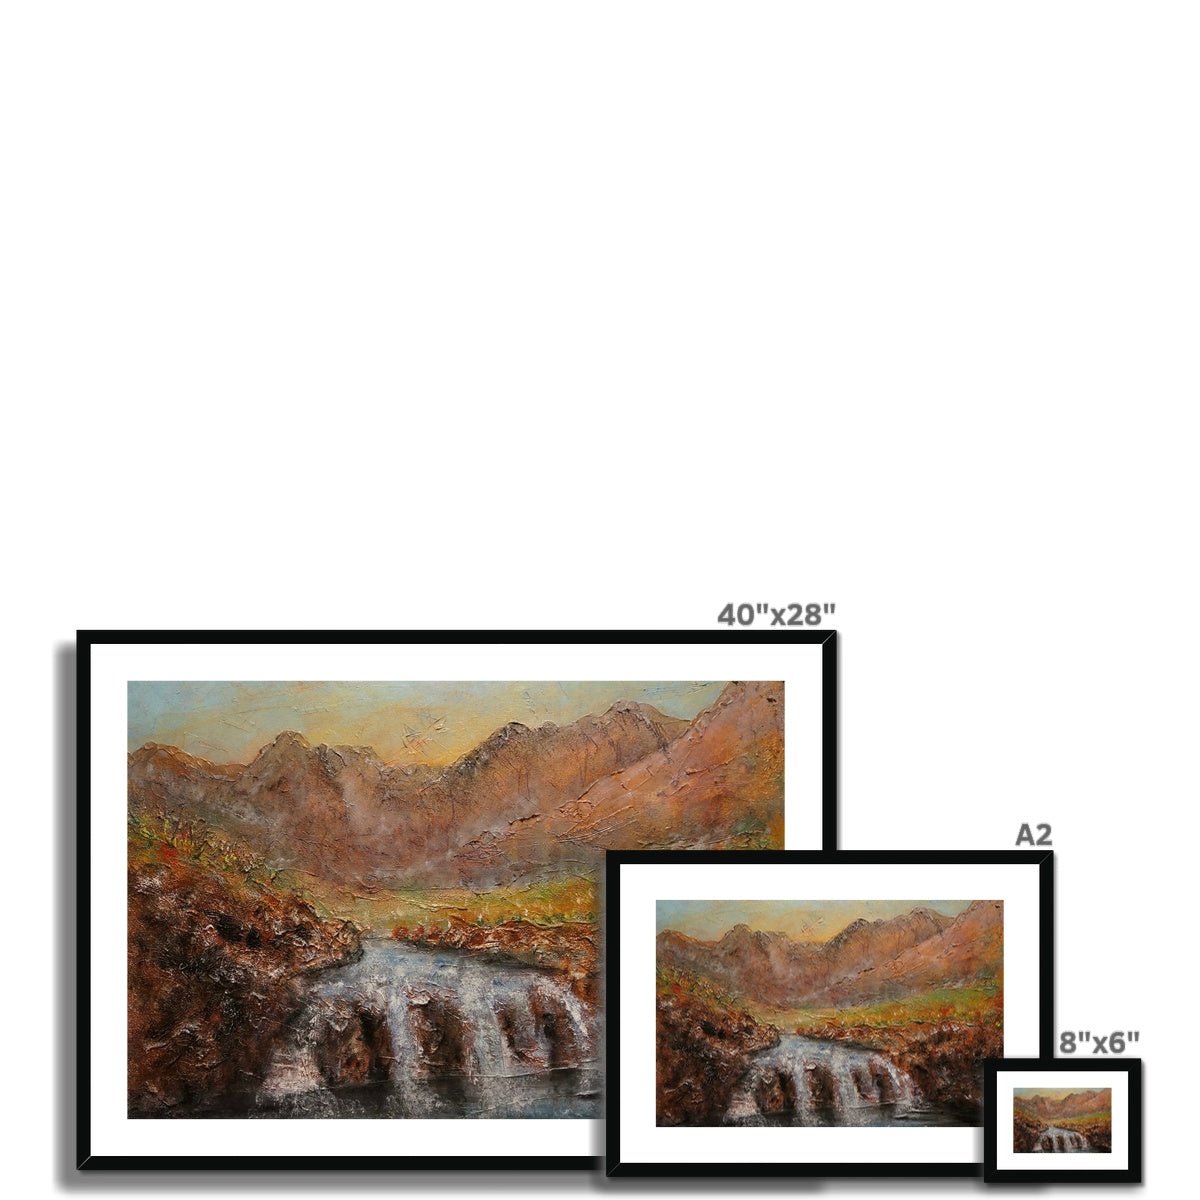 Fairy Pools Dawn Skye Painting | Framed & Mounted Prints From Scotland-Framed & Mounted Prints-Skye Art Gallery-Paintings, Prints, Homeware, Art Gifts From Scotland By Scottish Artist Kevin Hunter